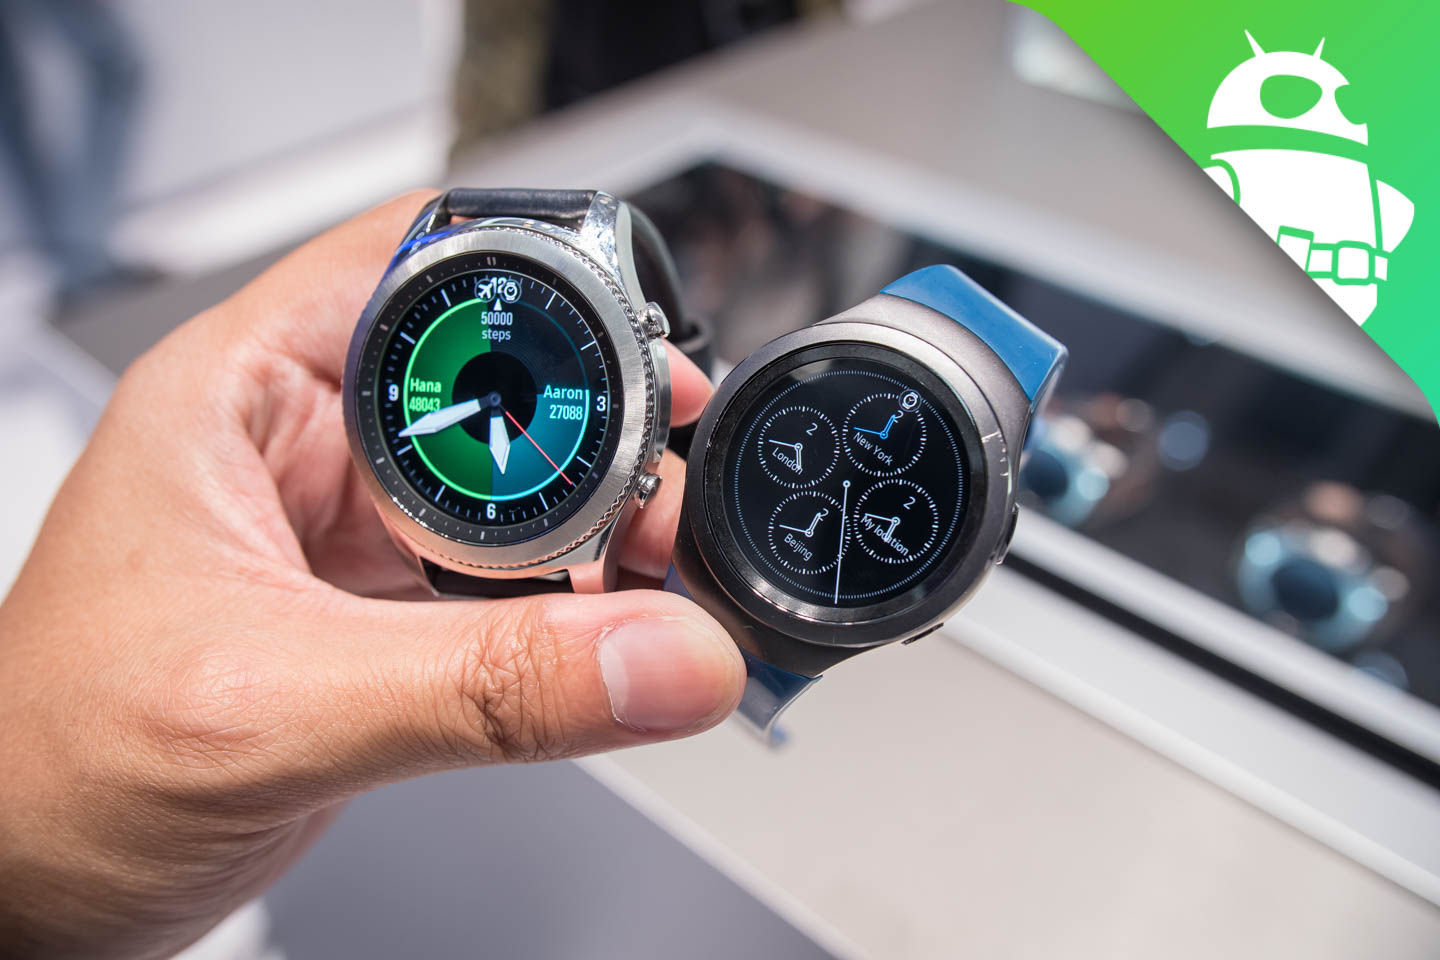 Samsung Gear S3 Vs Gear S2 Comparison Android Authority